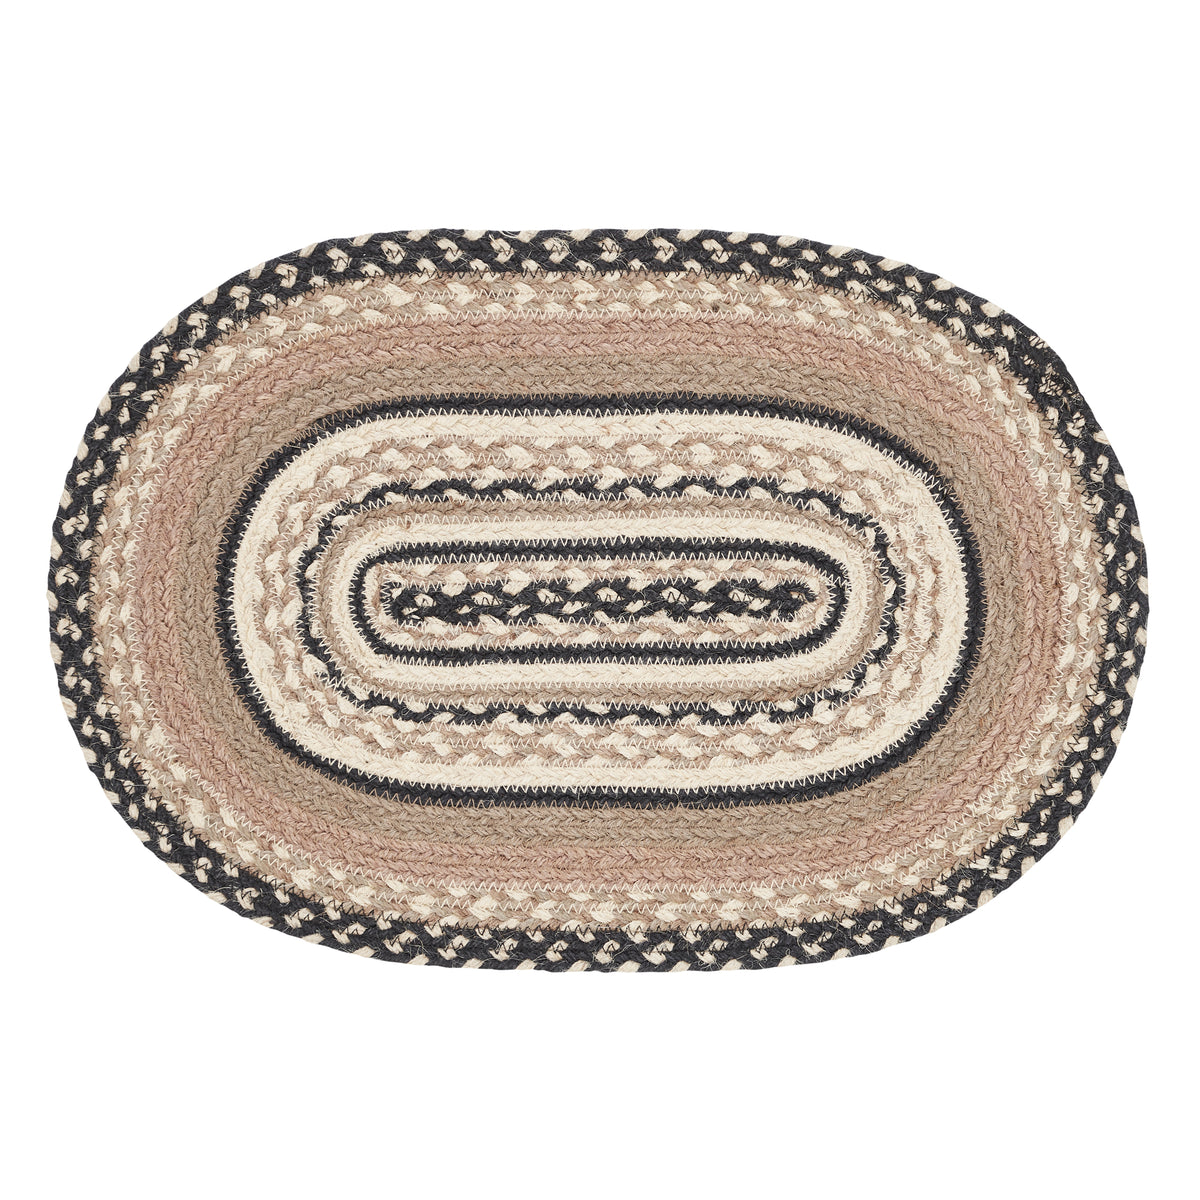 Sawyer Mill Charcoal Creme Jute Oval Placemat 12x18